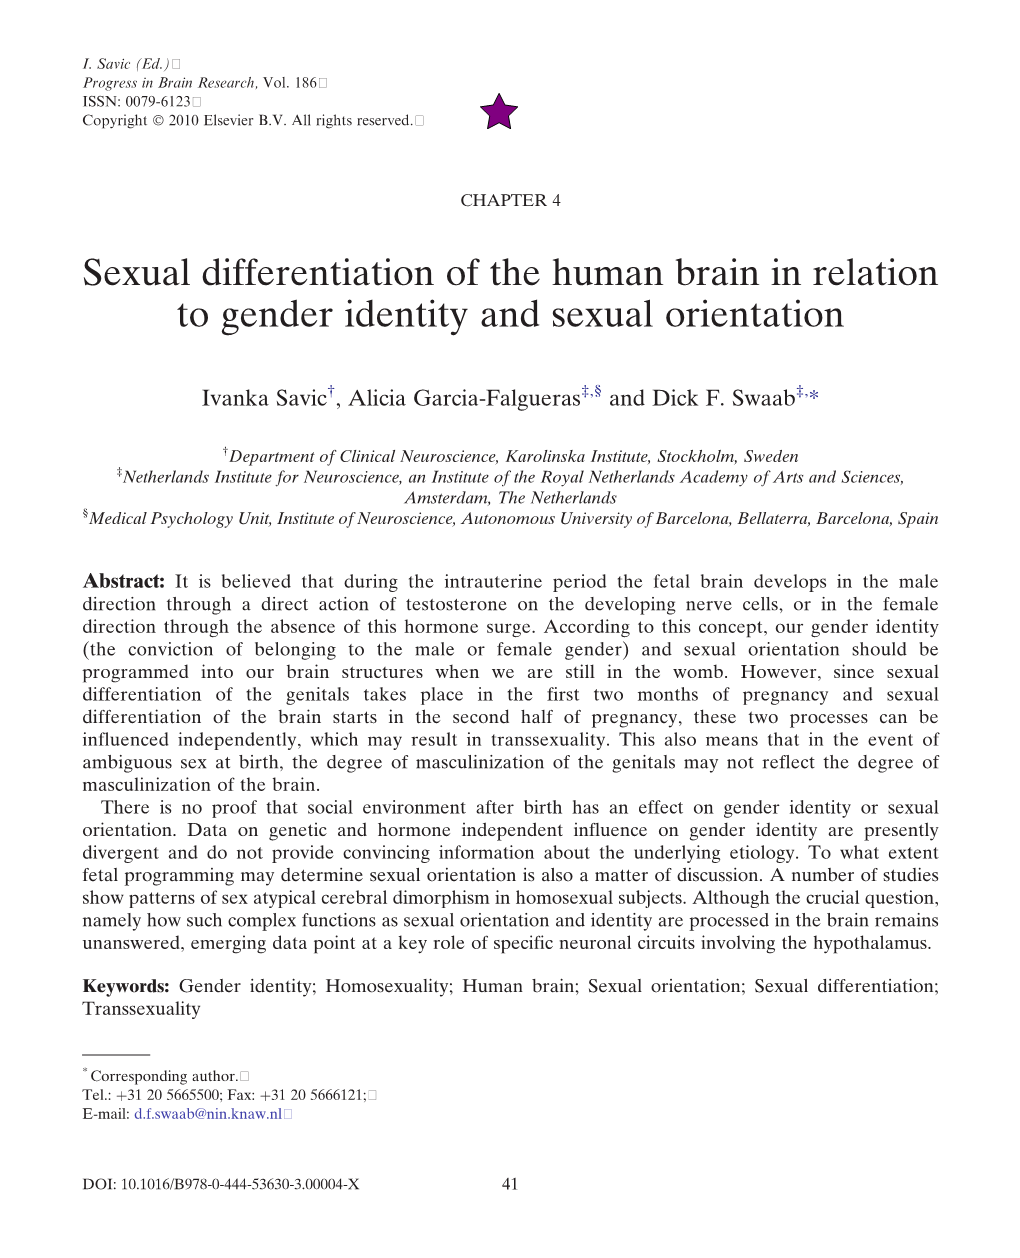 Sexual Differentiation of the Human Brain in Relation to Gender Identity and Sexual Orientation